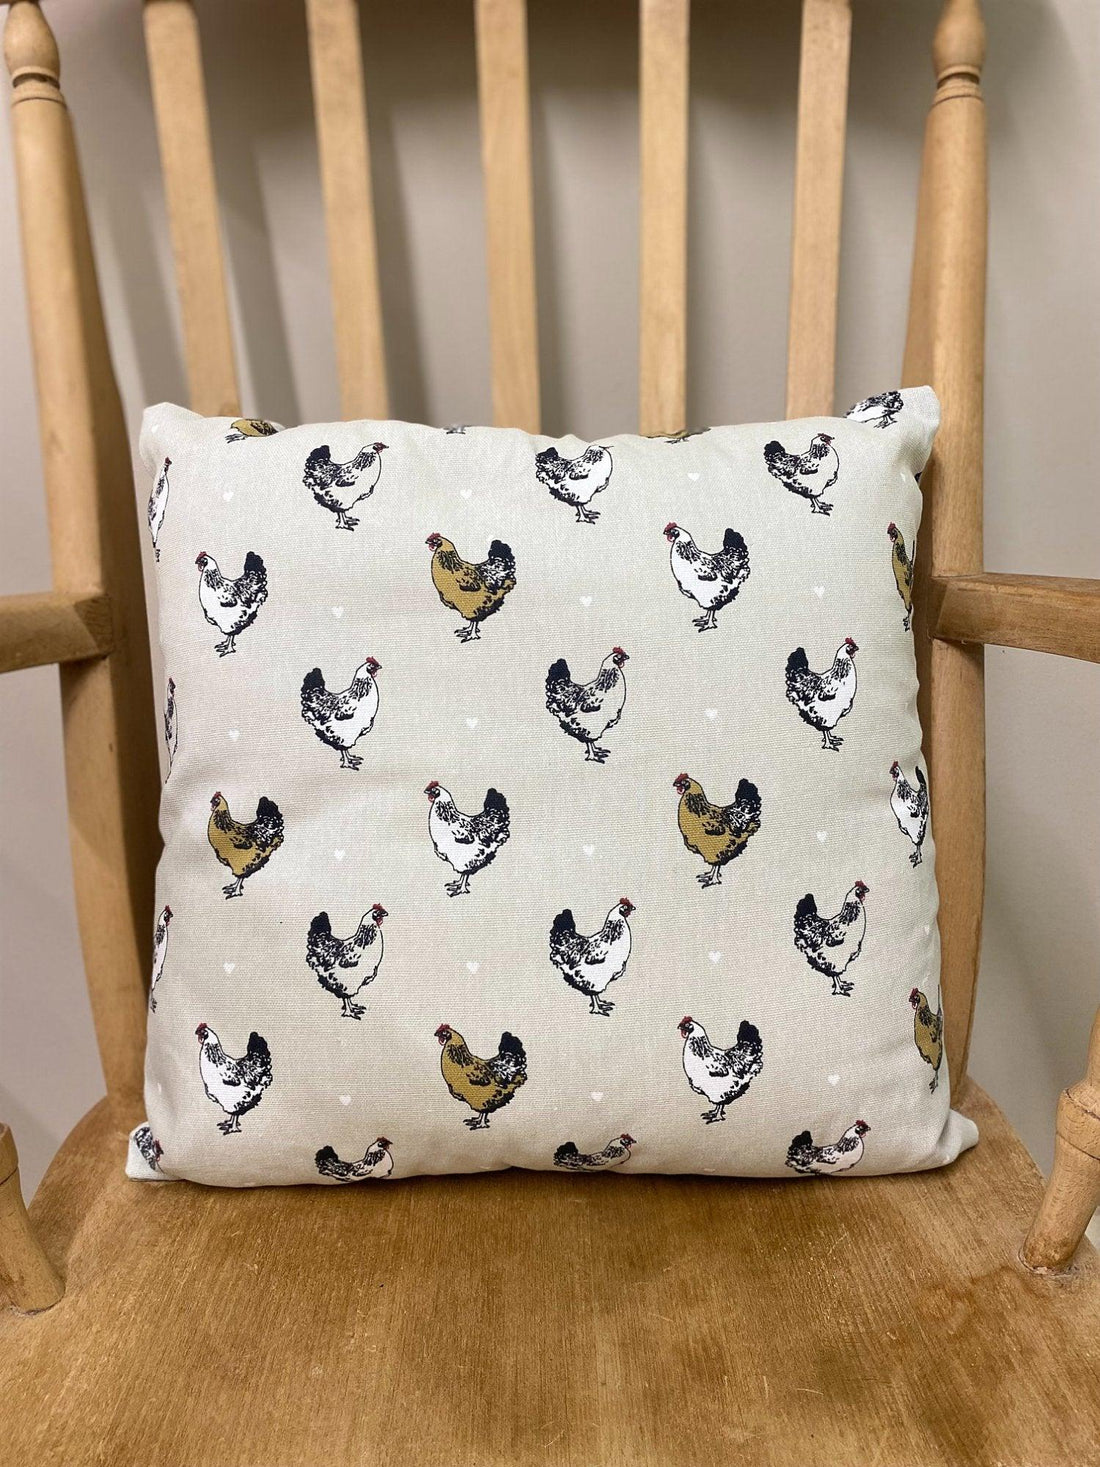 Scatter Cushion With A Chicken Print Design - £22.99 - Throw Pillows 